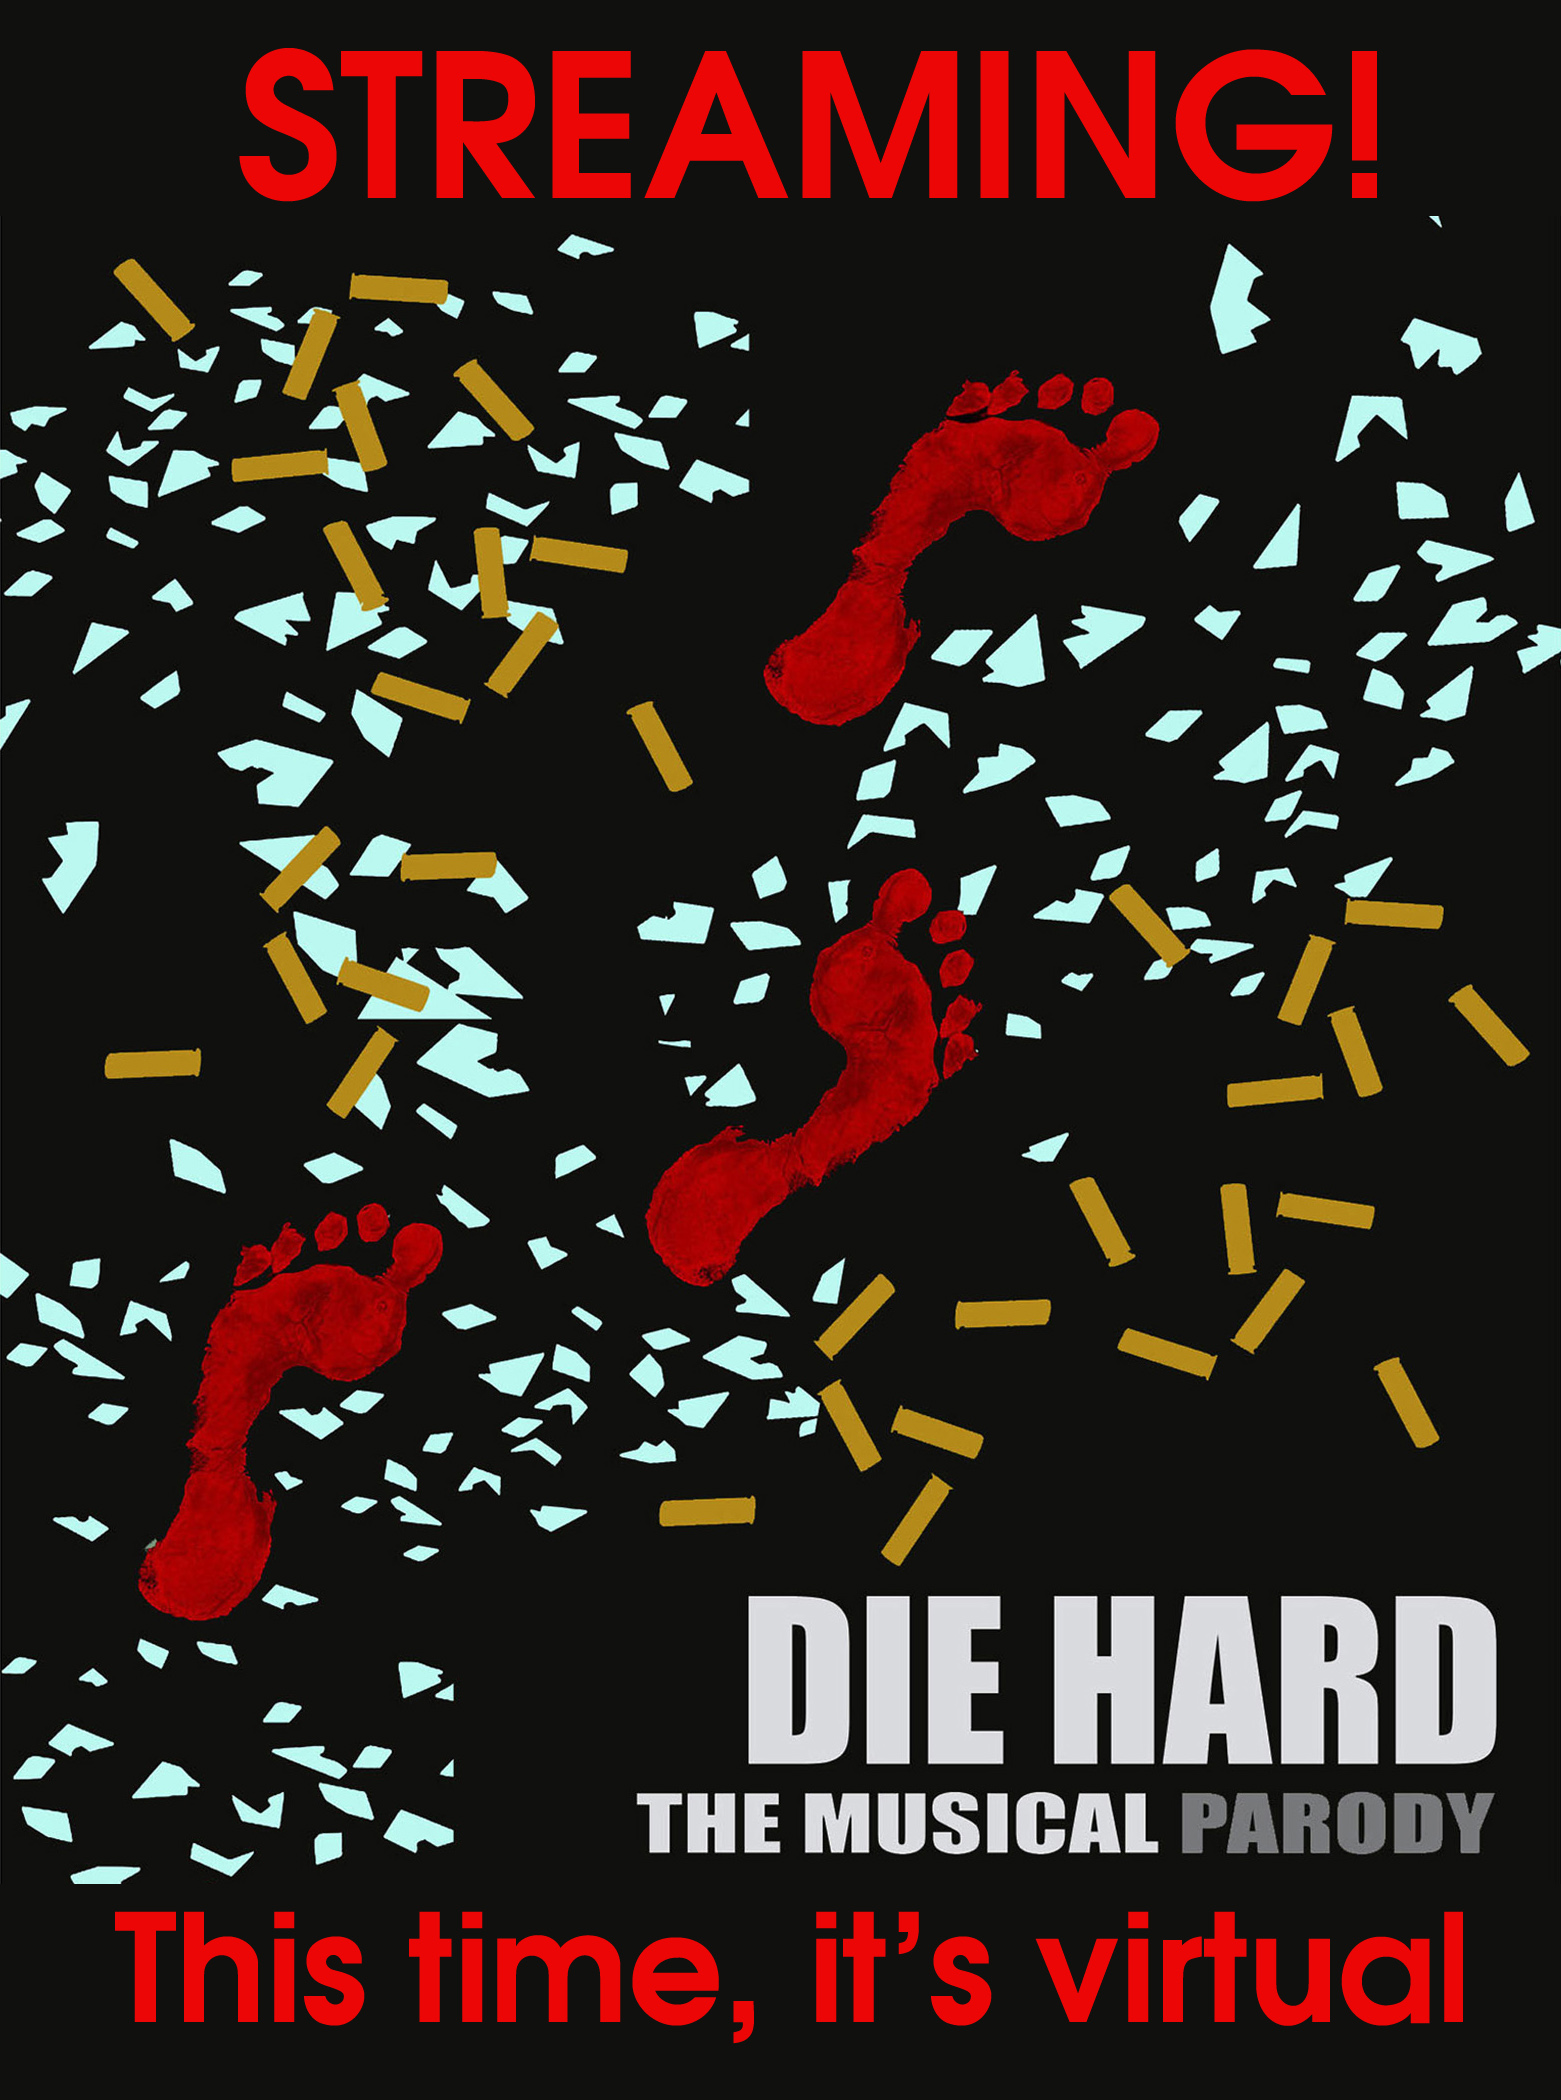 Die Hard the Musical Parody – Streaming Event